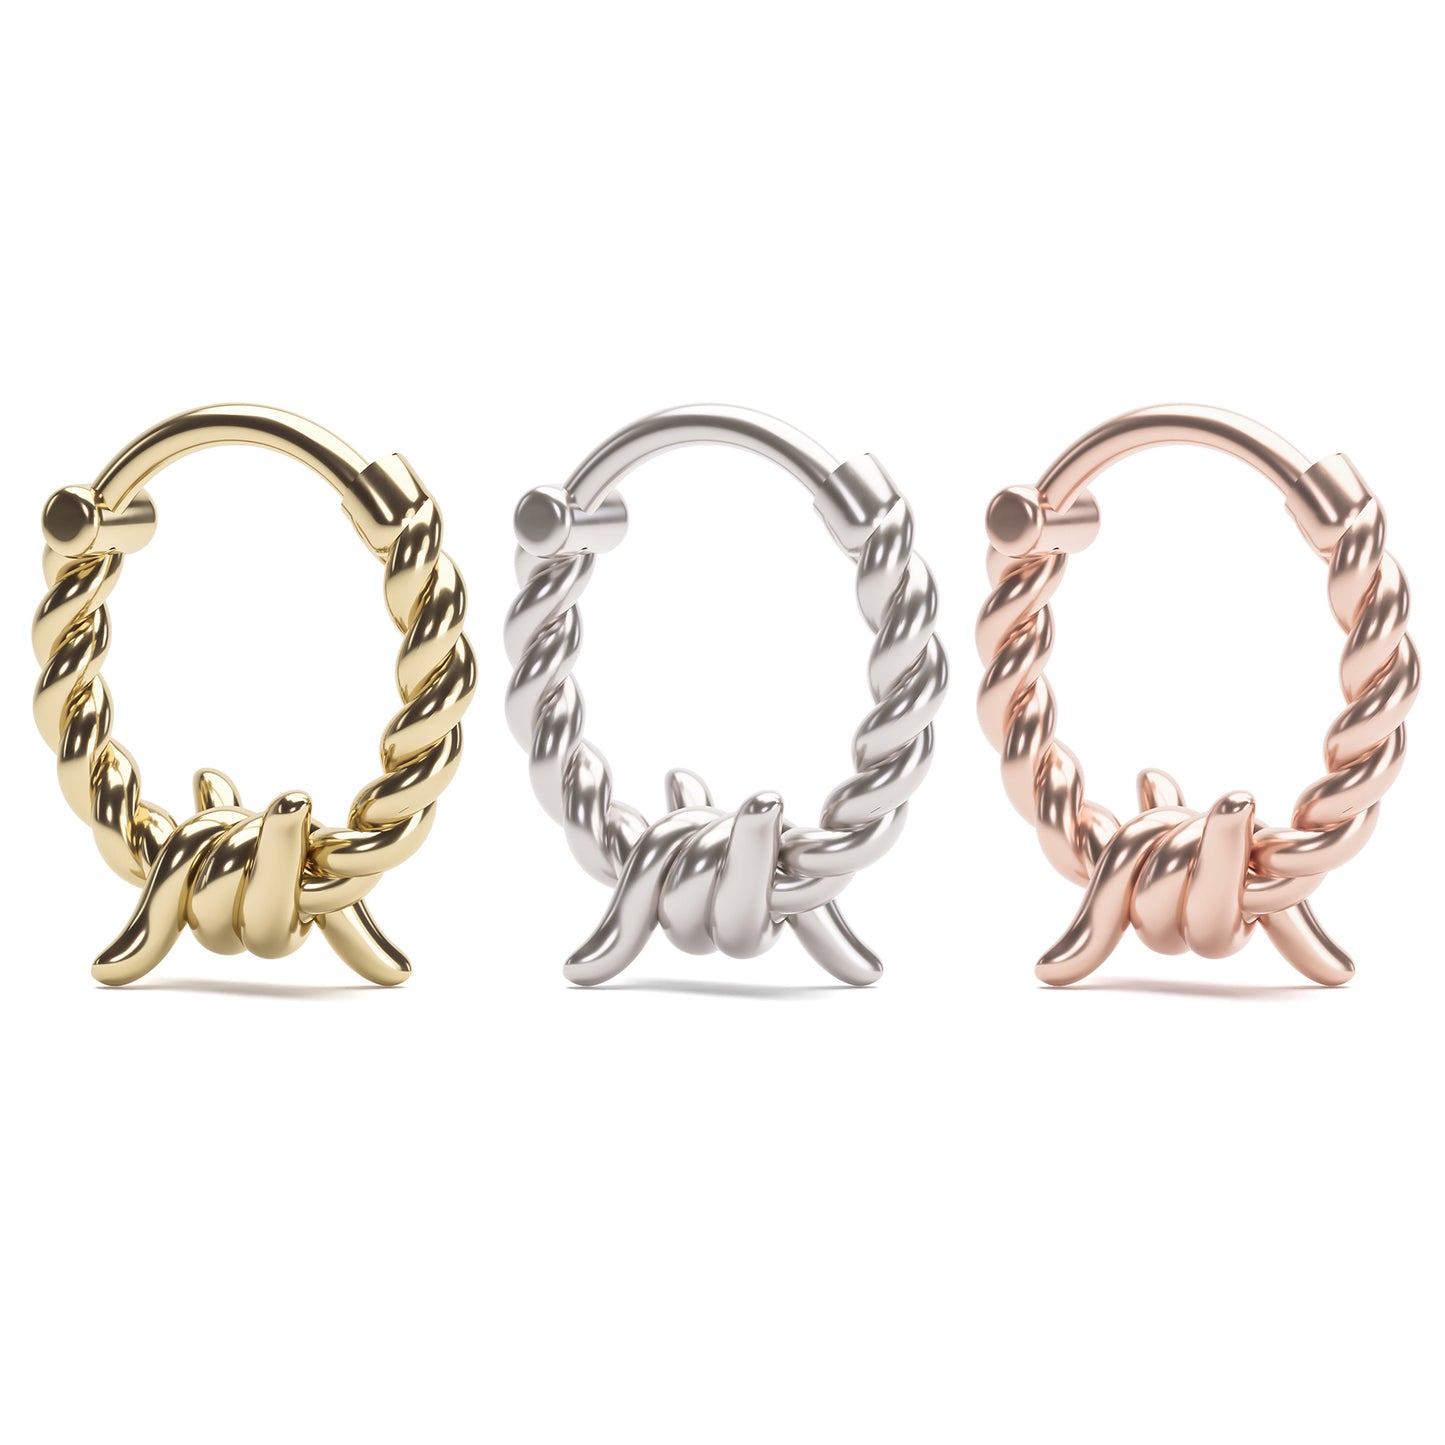 Solid Gold Rope Knot Clicker Hoop